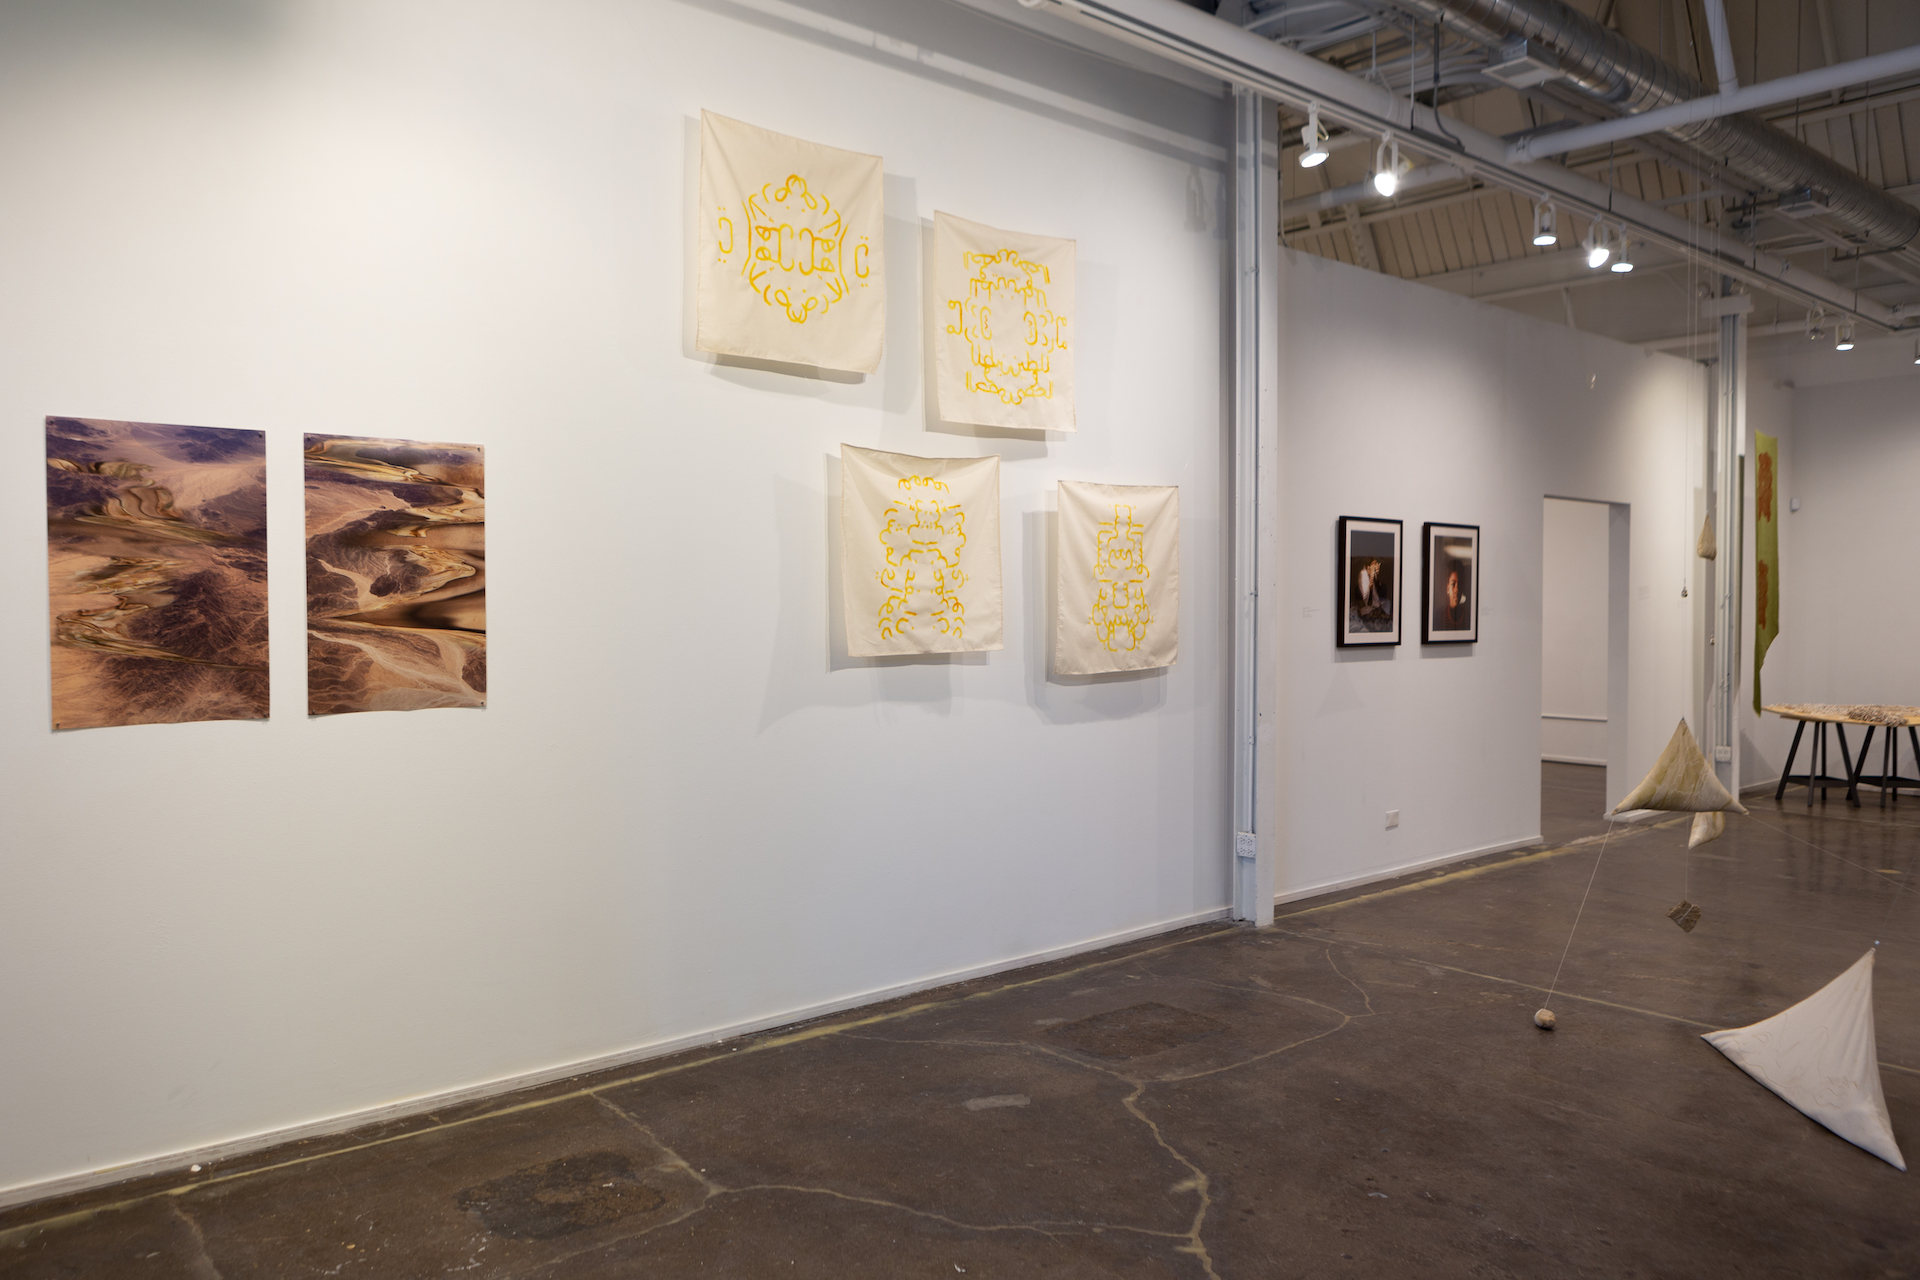 (Left of image): Lithostatic #1 and #2 (2022), Photography, 20 x 30 in
(Right of image): Muthanayat: Mirrored folds of the same self (2022), Saffron, rosewater, fabric, 30 x 30 in